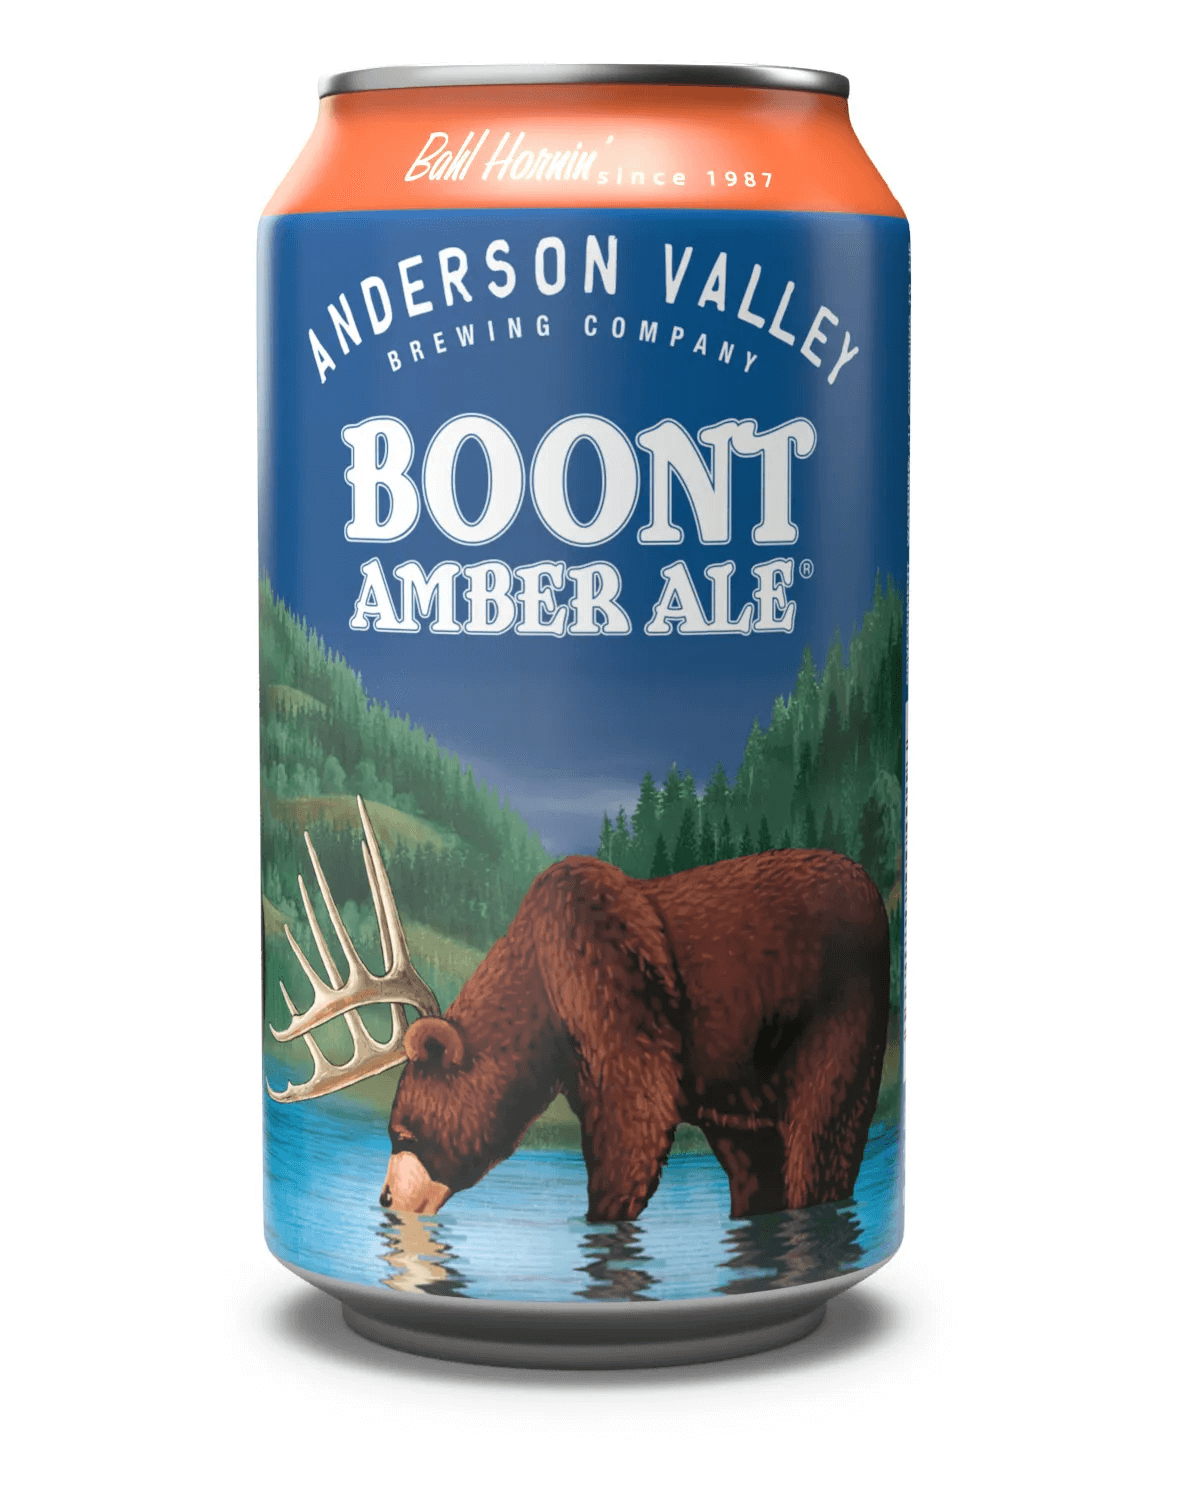 Anderson Valley Brewing Co's {"id":60,"brewery_id":9,"name":"Boont","image":"boont.png","slug":"anderson-valley-brewing-co\/boont","calories":null,"abv":"5.8","ibu":16,"type":"Ale","style":"Amber","description":"Balance is what makes our Boont Amber Ale so unique: rich, crystal malts give this beer a deep copper hue and contribute a slight caramel sweetness while the herbal, spicy bitterness from carefully selected whole-cone hops impart a crisp, clean finish. Hints of sun toasted grain, toffee, and fruity esters compliment the mellow, noble hop aroma.","available":"All Year","created_at":null,"updated_at":null}